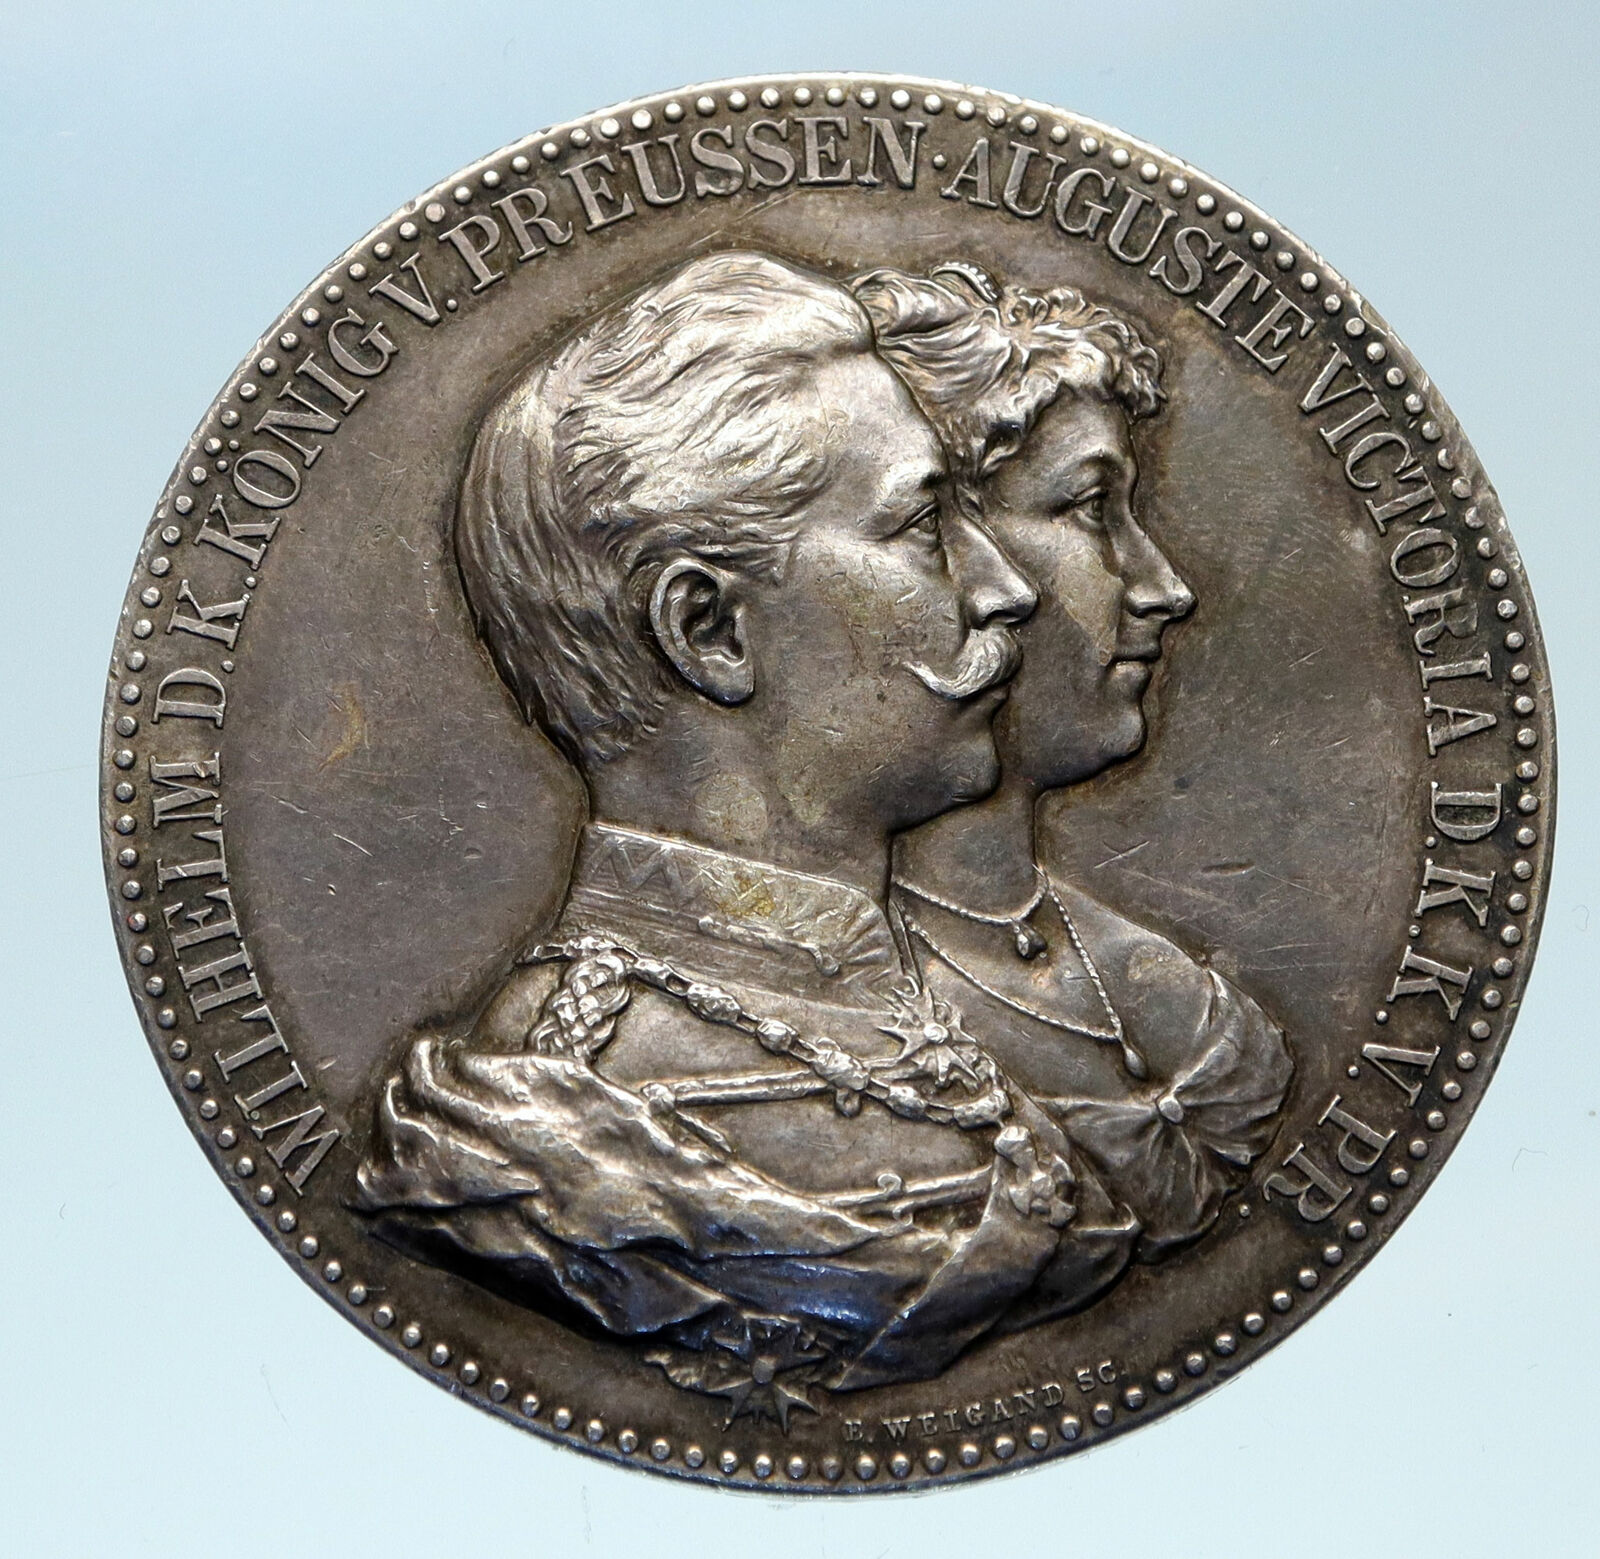 1859-1941 WILHELM II & AUGUSTA VICTORIA of PRUSSIA & GERMANY Silver Medal i82728